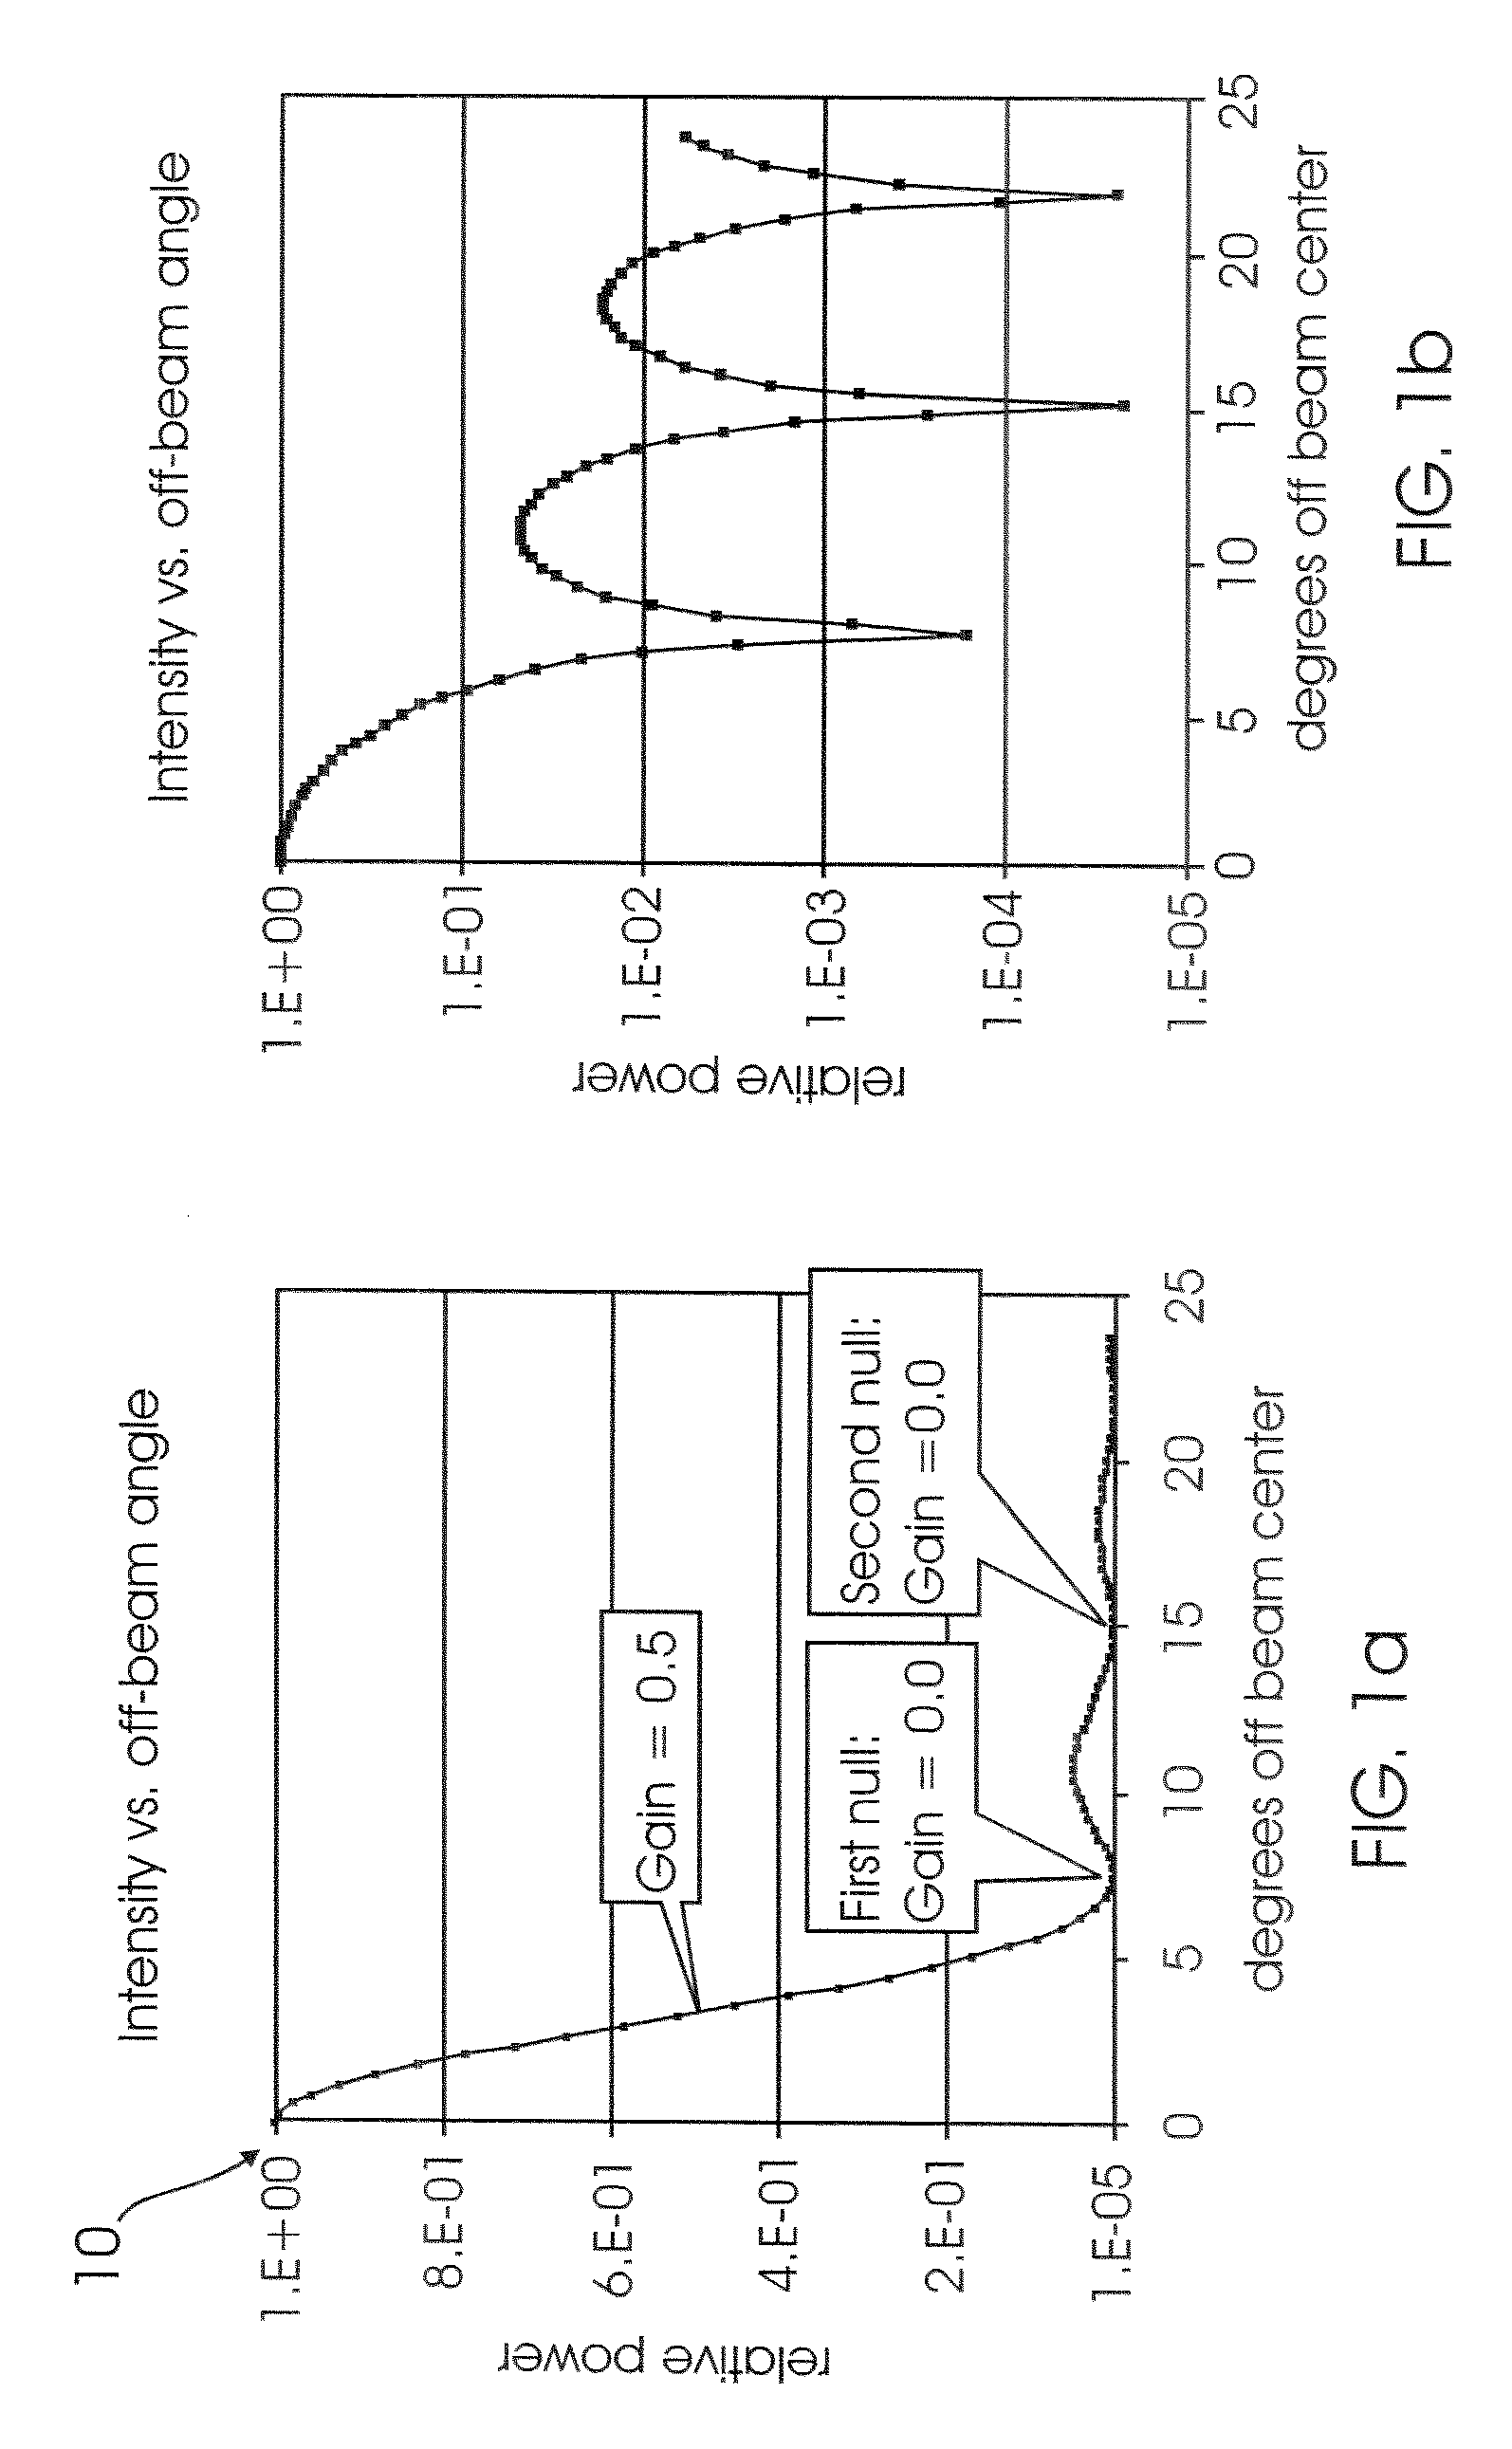 Method for pointing high-gain antennas to reduce interference in mobile networks